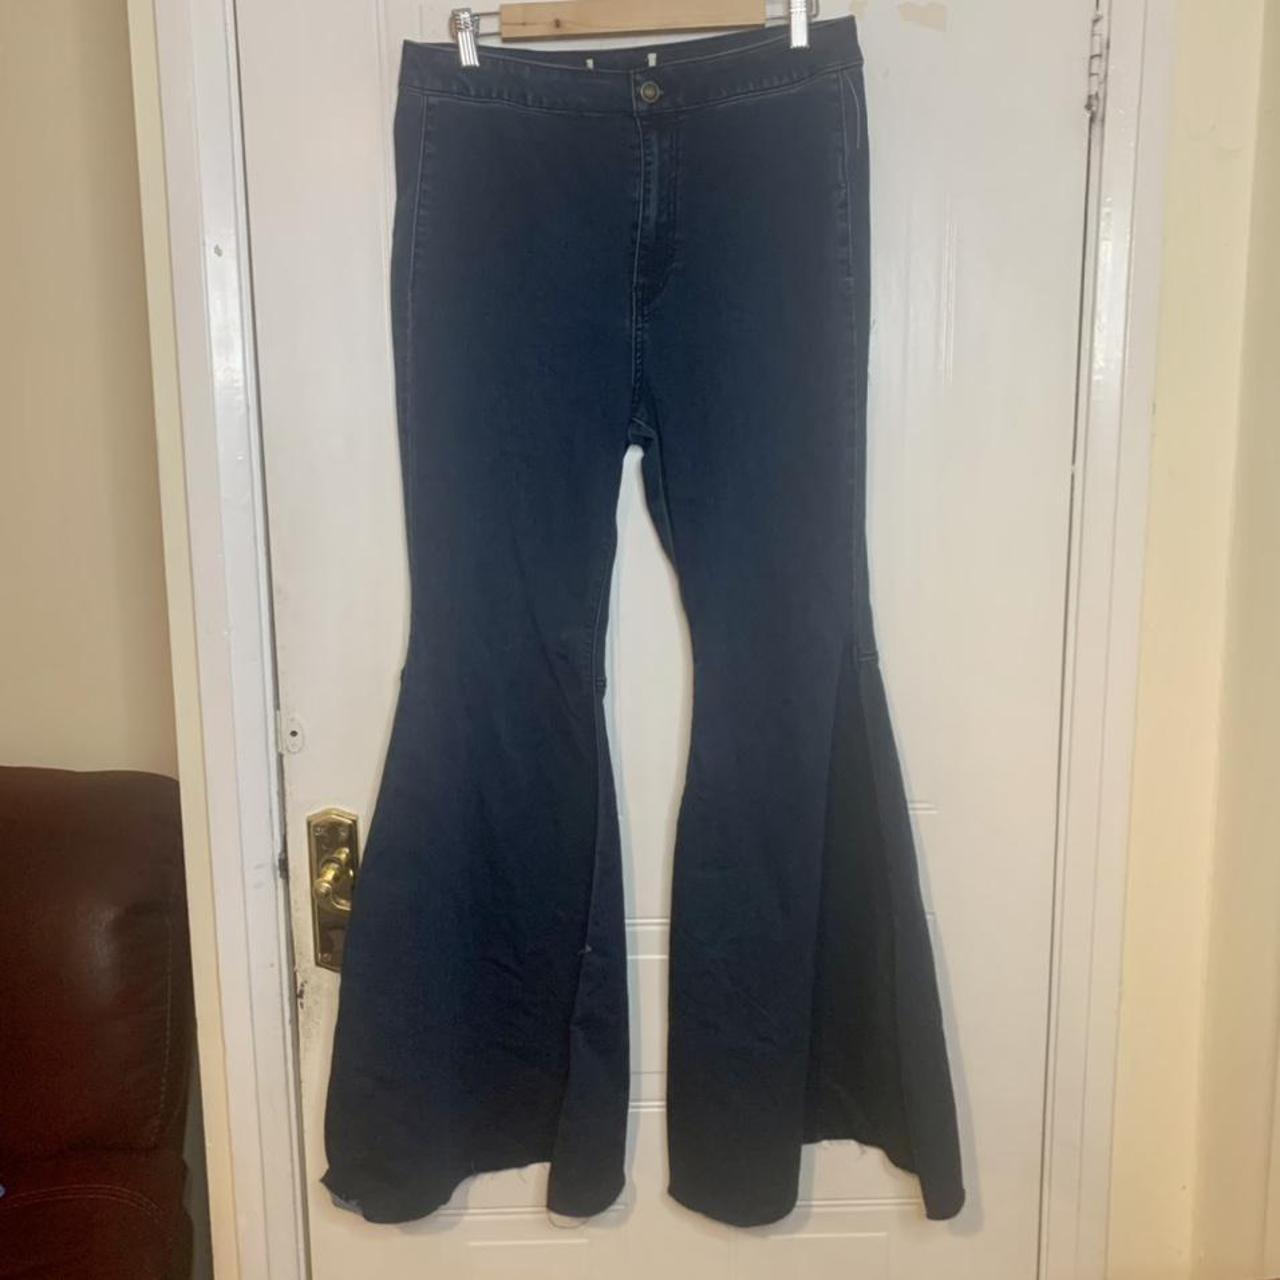 Product Image 1 - Free people flares
Bell bottoms
Size UK